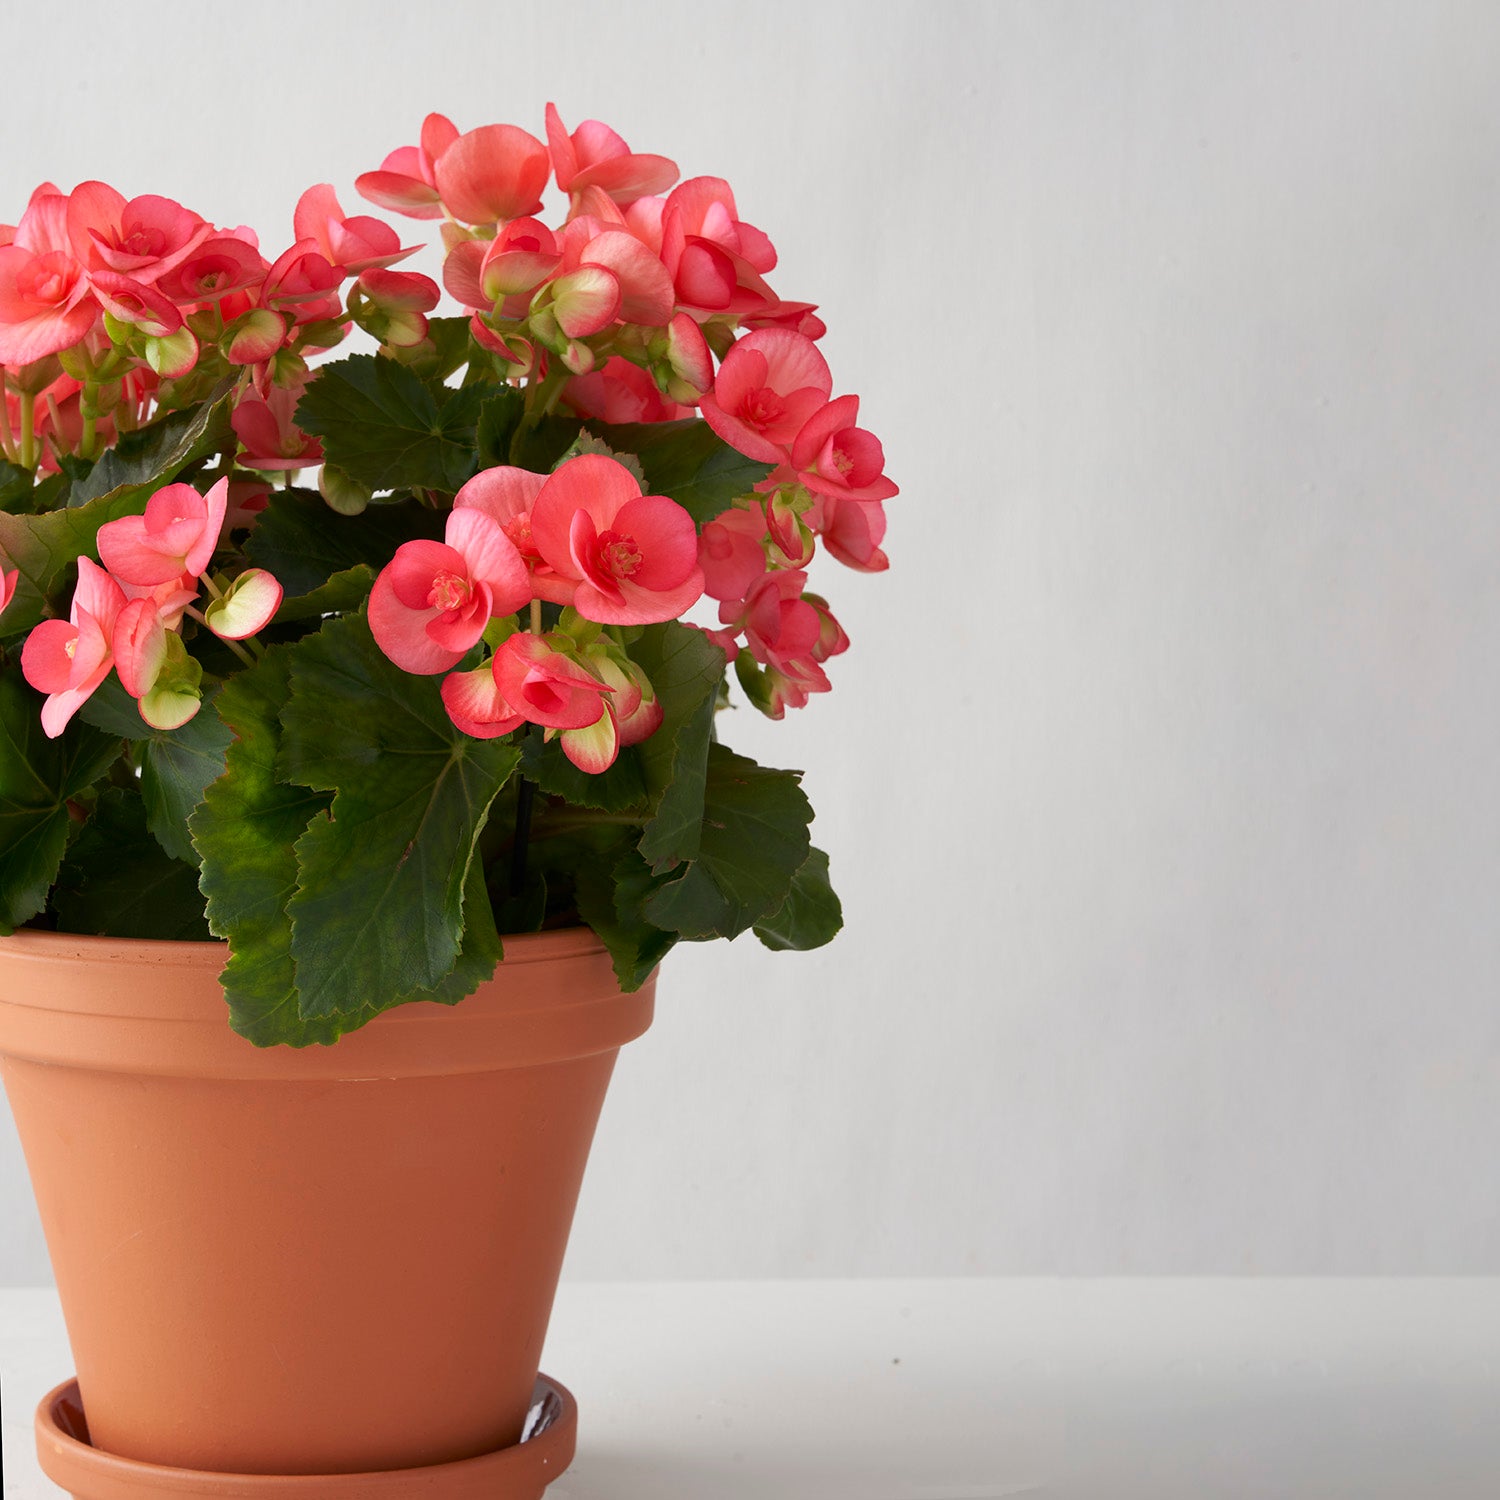 Coral pink begonia in clay pot, off center with white backgound.